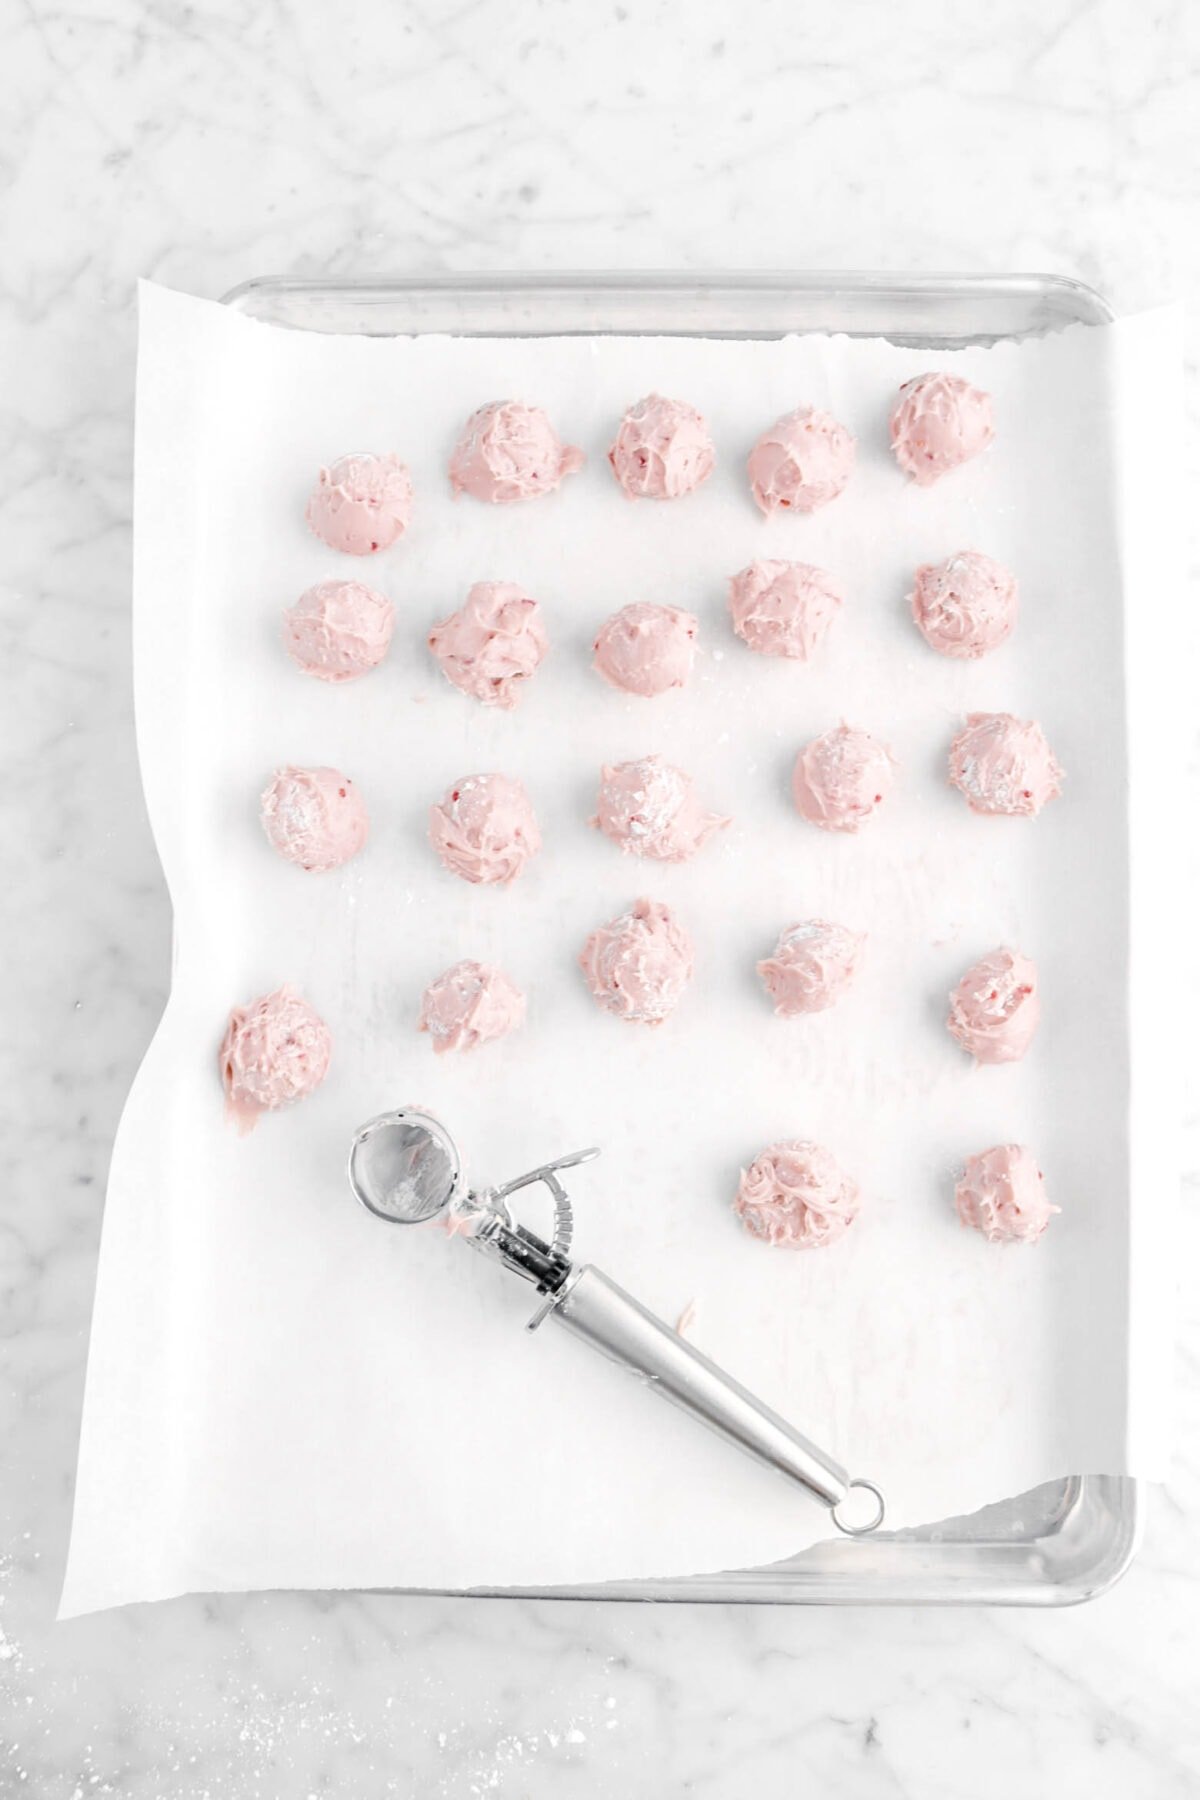 raspberry ganache scooped into balls on lined sheet pan